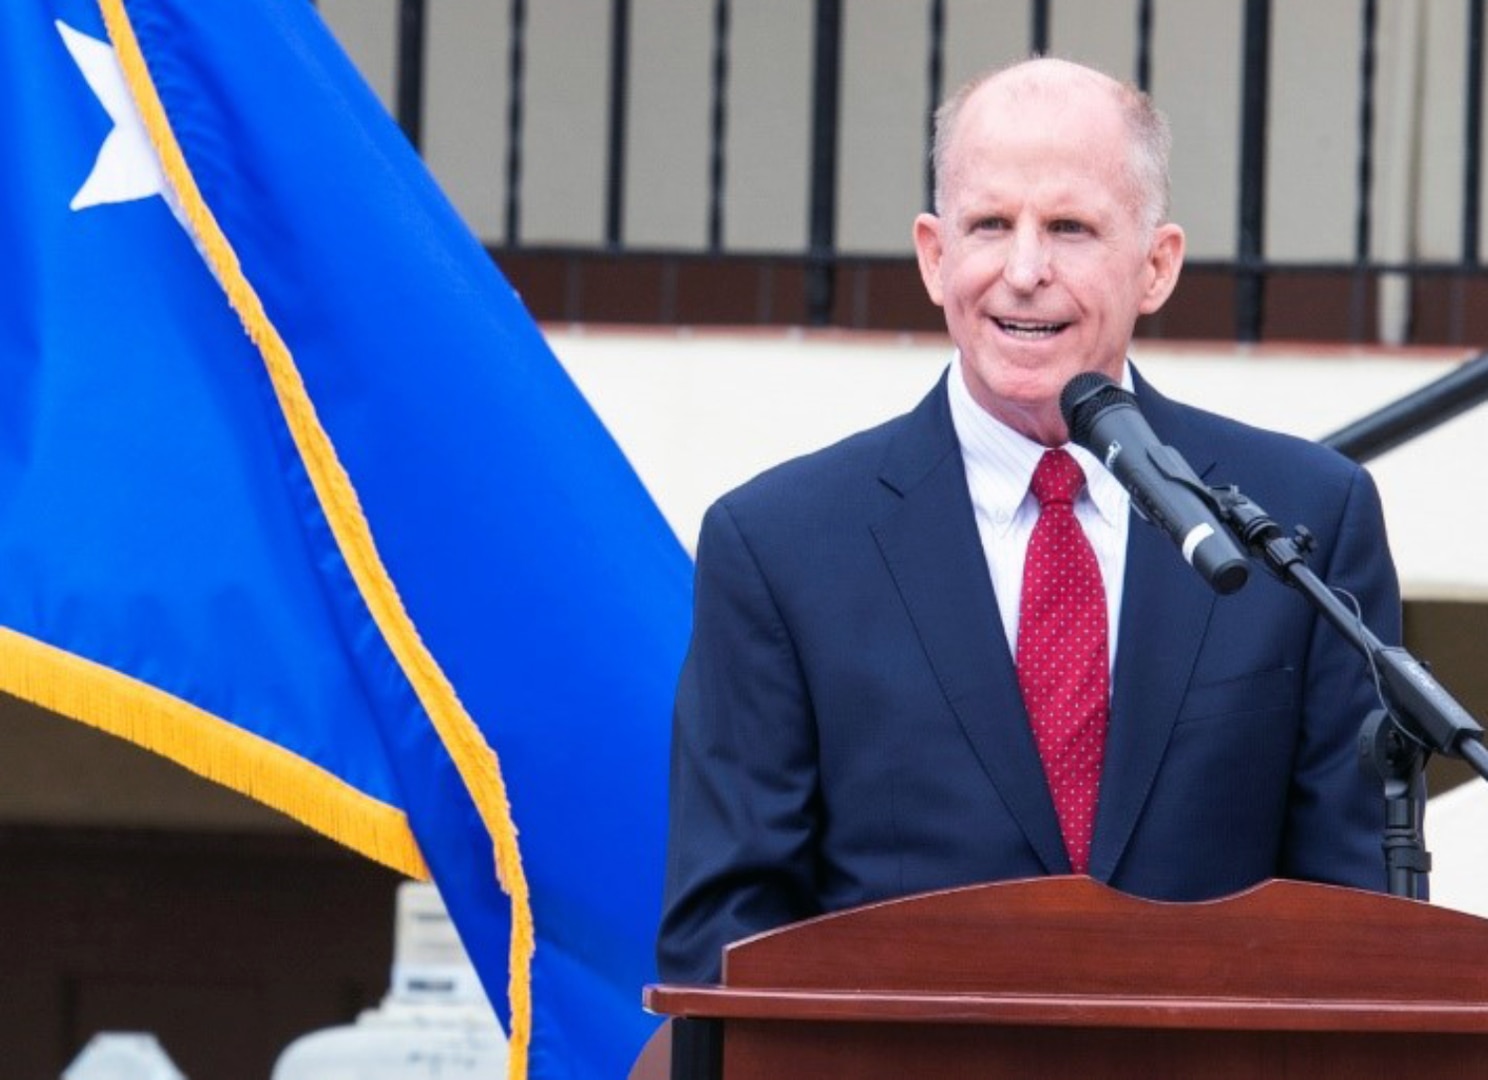 Retired Gen. Stephen Wilson, former U.S. Air Force Vice Chief of Staff, gives remarks during the Wilson Hall dedication ceremony at Joint Base San Antonio-Randolph April 9.